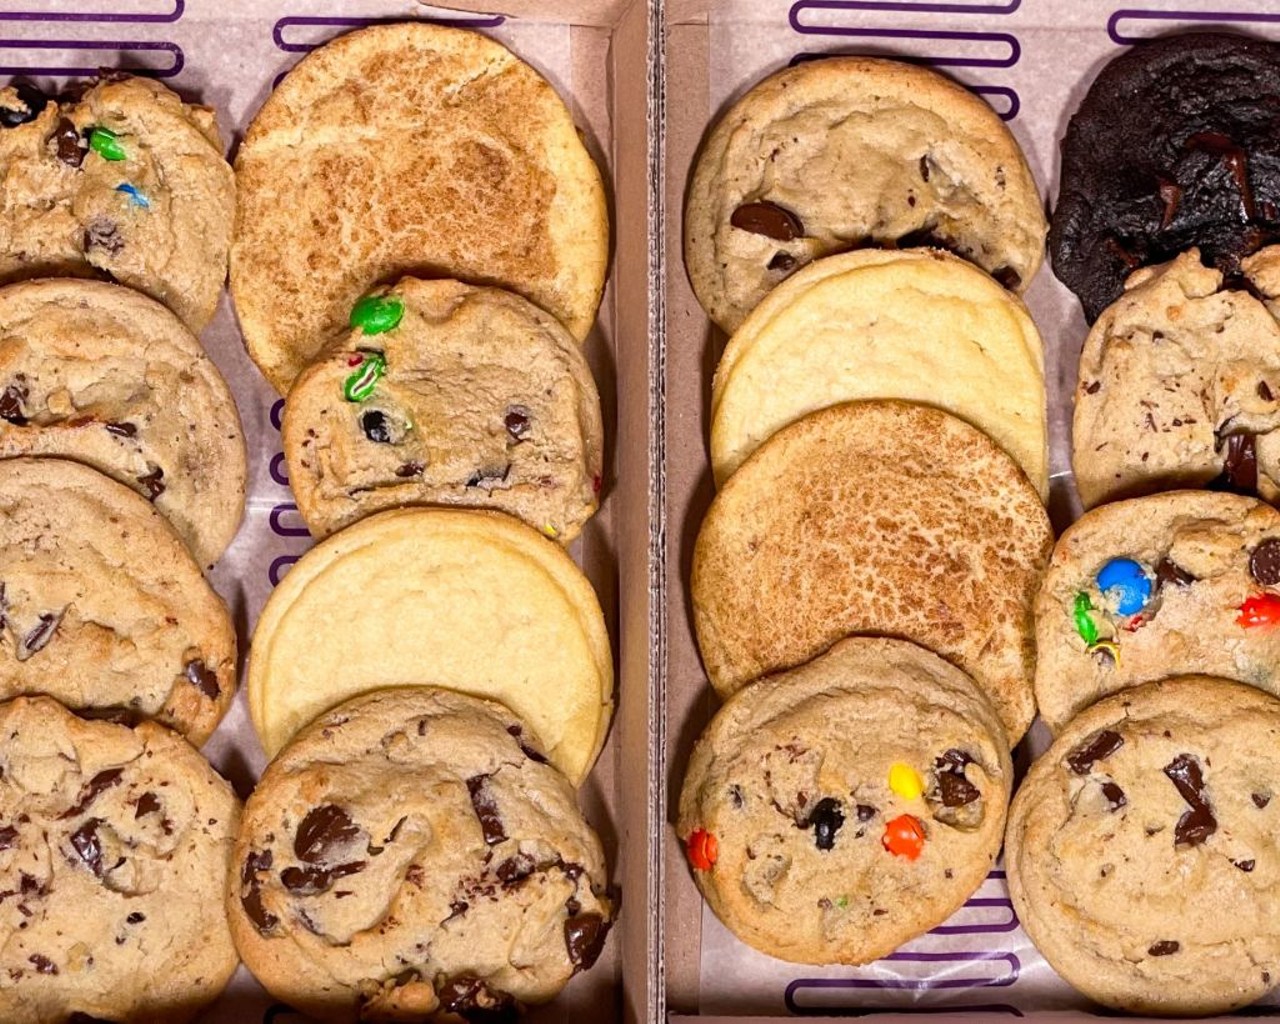 Insomnia Cookies 
131 N Orange Ave, Orlando, FL 32801, 12101 University Blvd #225, Orlando, FL 32817 (407) 512-9237, (407) 901-1873
While they sell regular cookies they have vegan options! They have the vegan birthday cake, chocolate chunk and double chocolate chunk  cookies. They are warm and fresh right when you order them.
Photo via Insomnia Cookies/Instagram